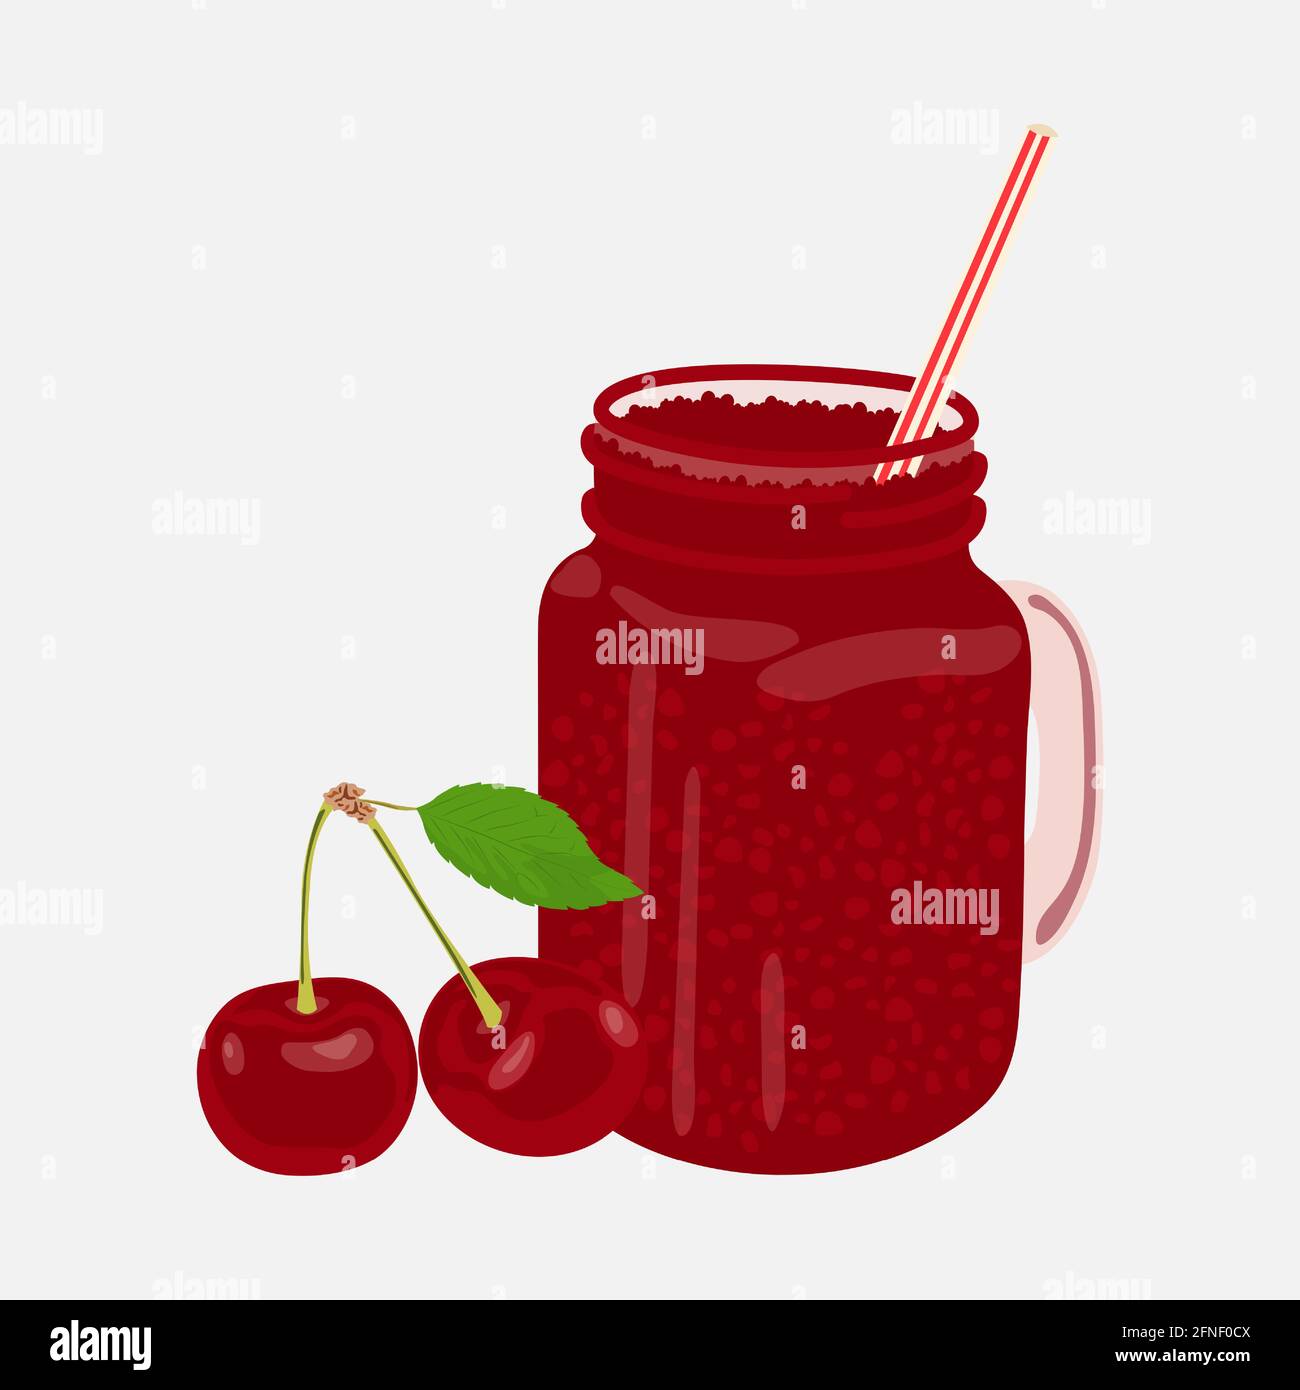 https://c8.alamy.com/comp/2FNF0CX/cherry-smoothie-organic-berry-cocktail-in-glass-with-straws-healthy-energy-drink-vector-illustration-template-for-the-menuhealthy-food-2FNF0CX.jpg